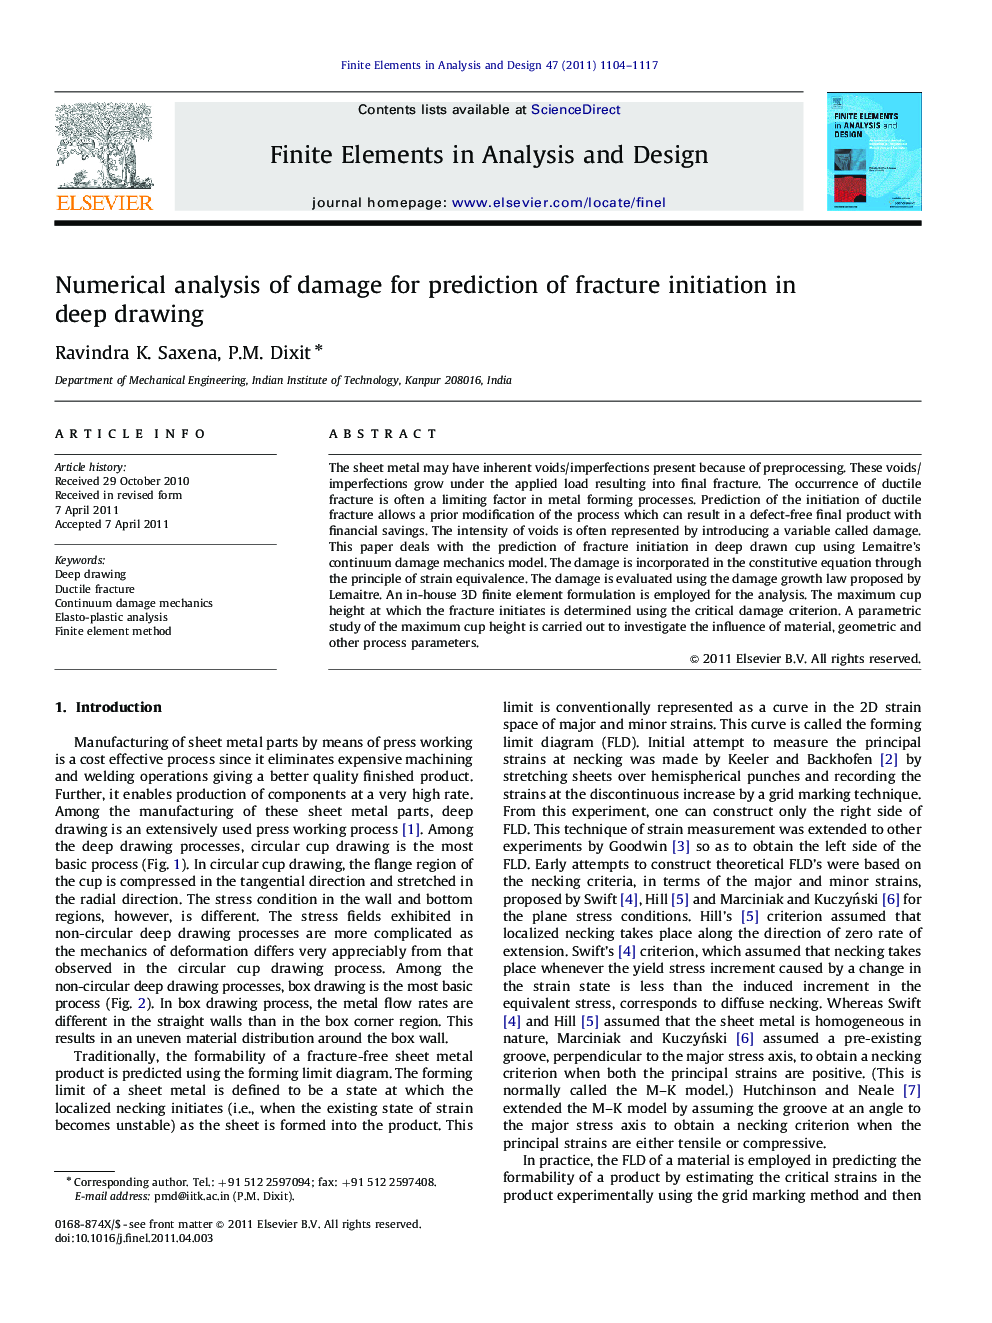 Numerical analysis of damage for prediction of fracture initiation in deep drawing